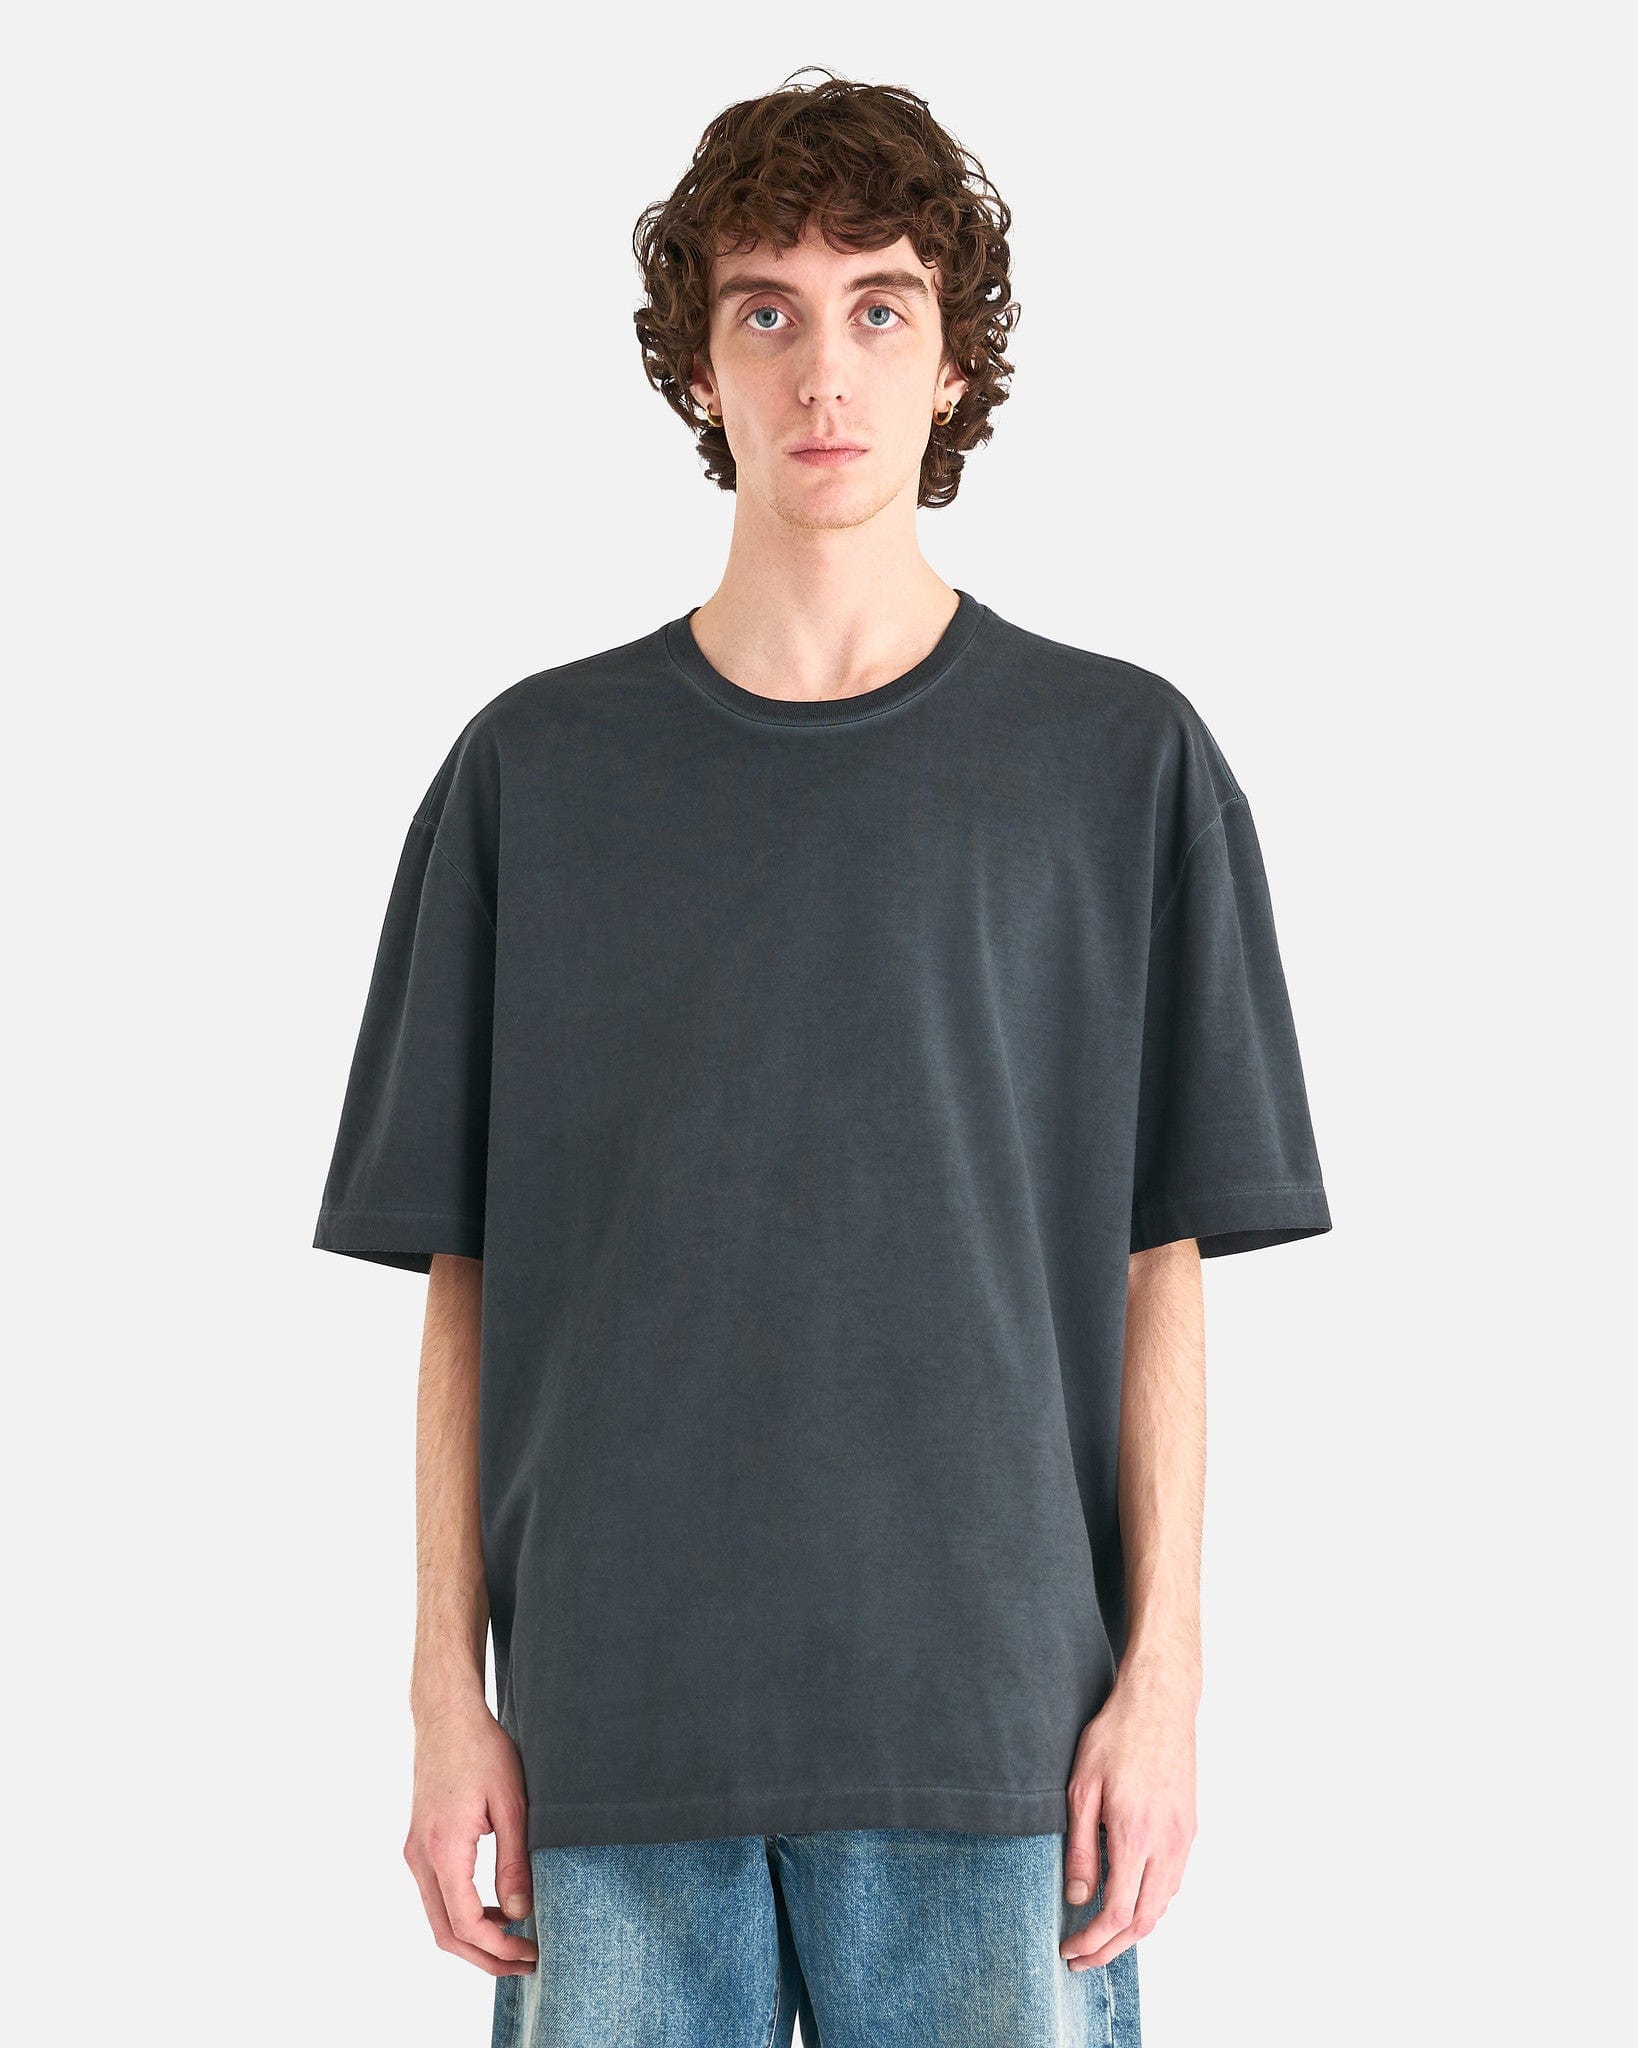 Oversized T-Shirt in Anthracite